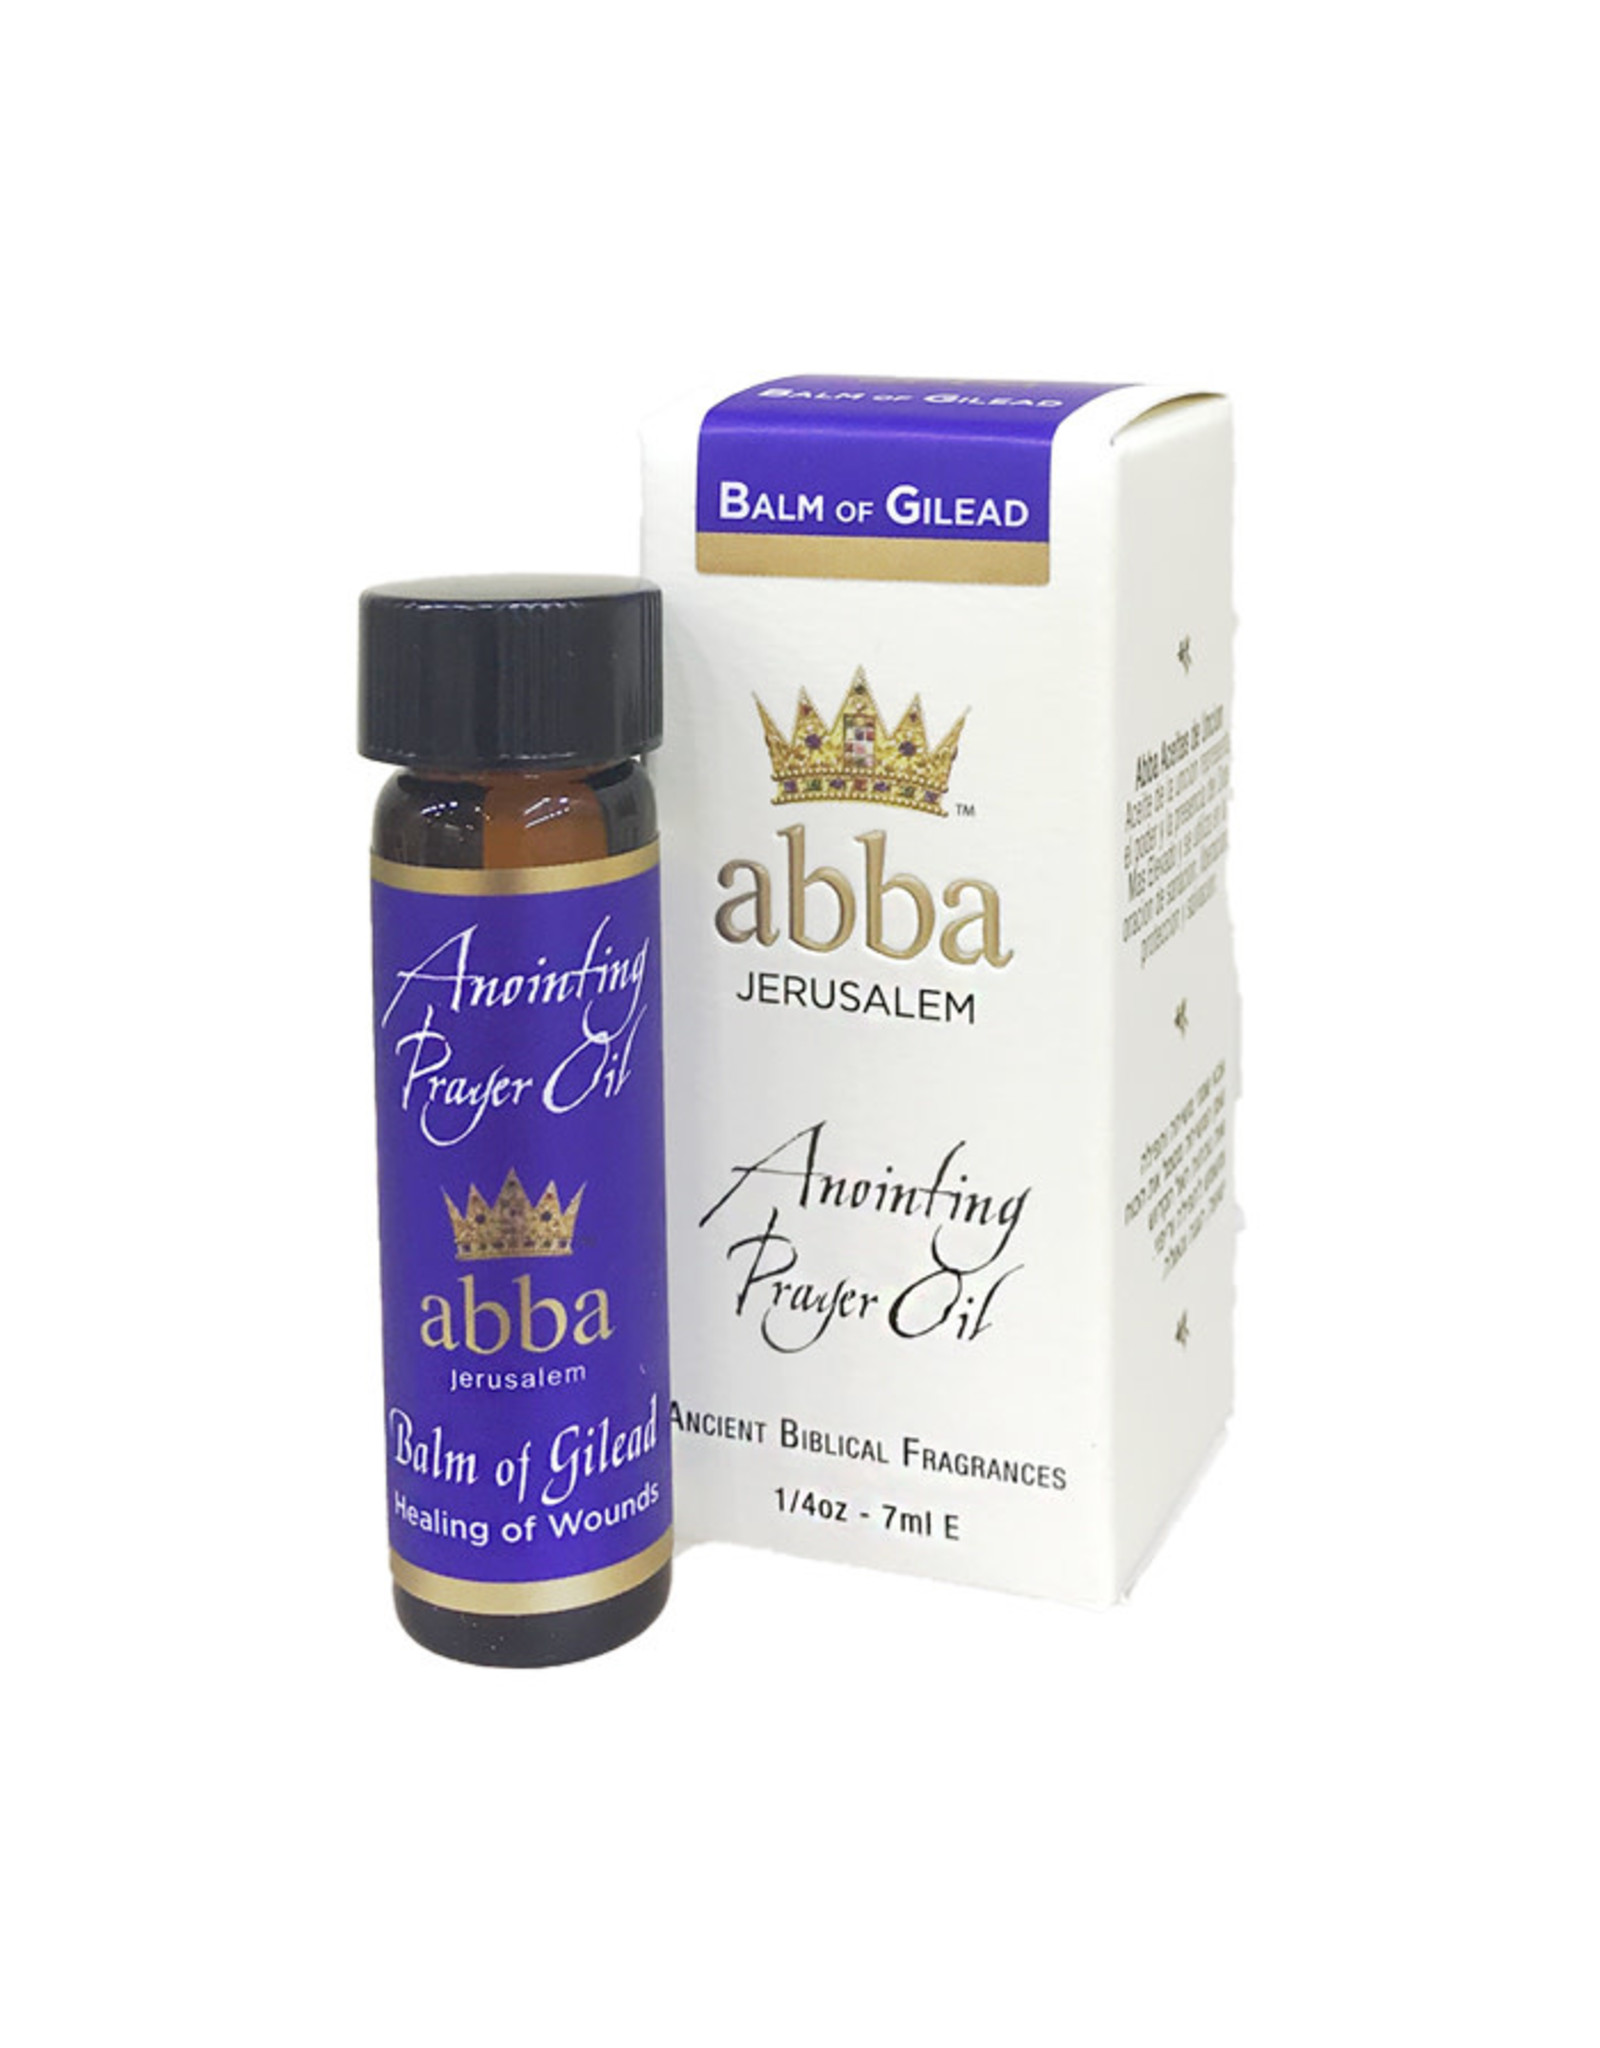 Abba Oil Anointing Oil - Balm of Gilead (Healing of Wounds), 0.25oz